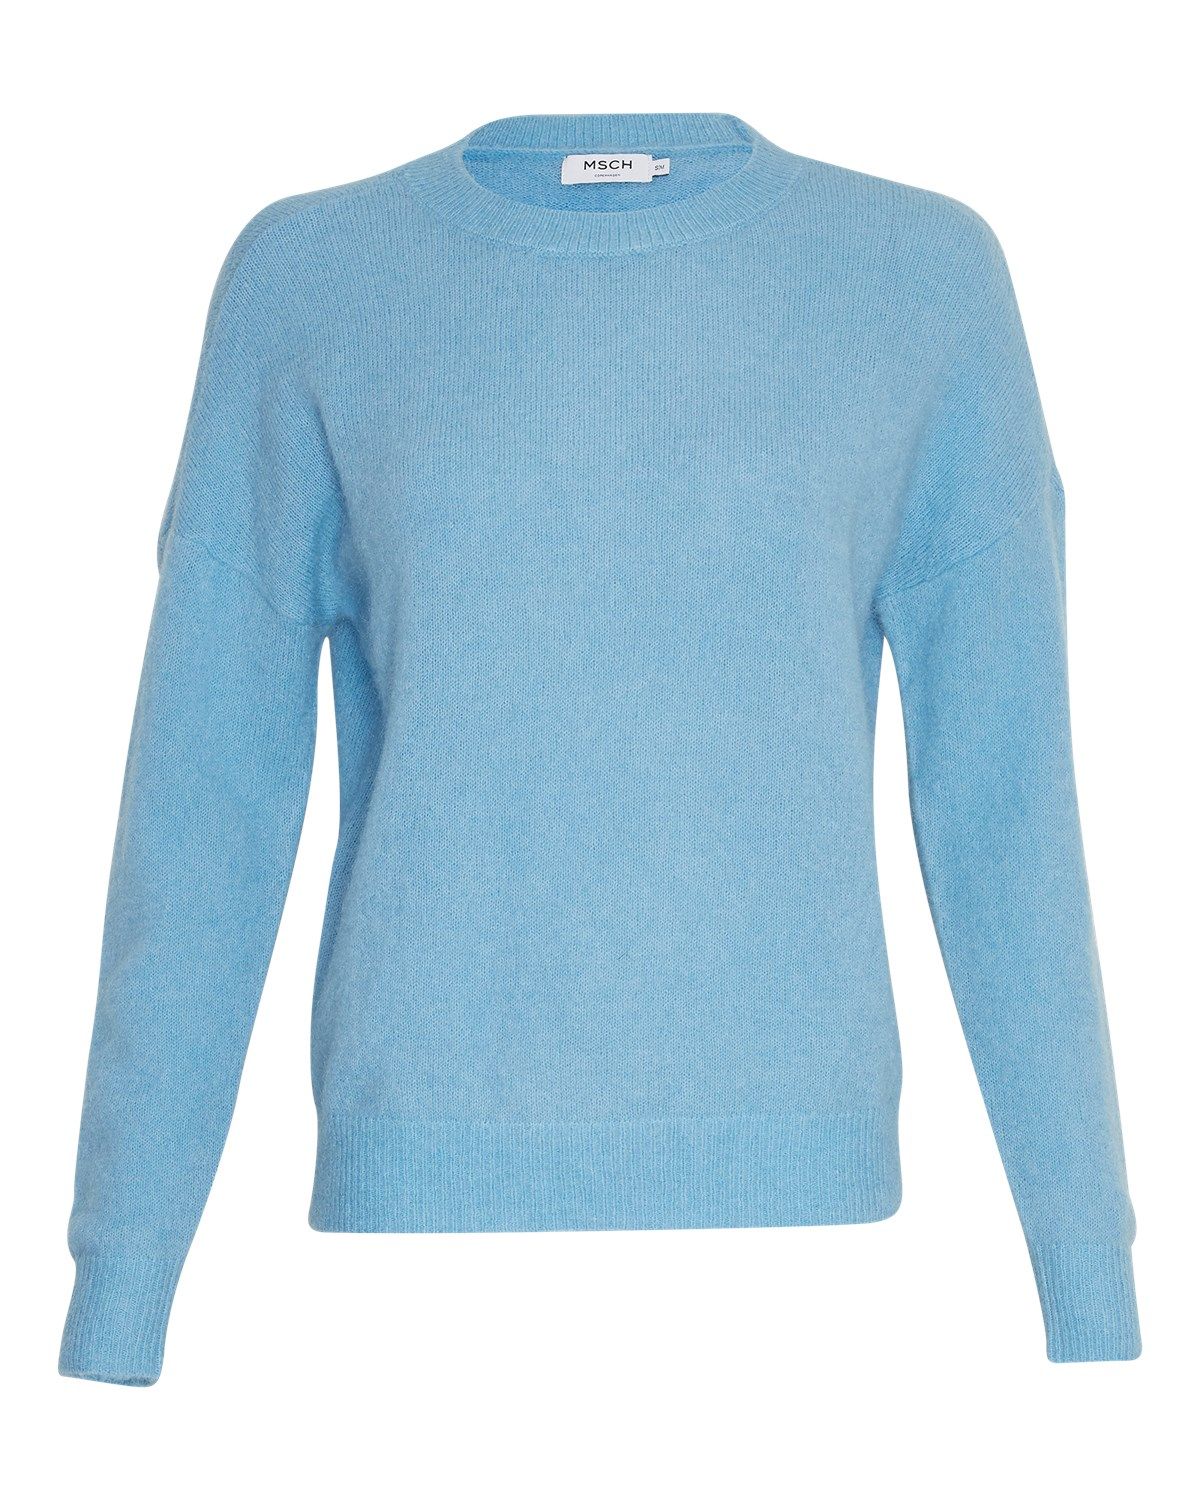 femme mohair o pullover_16918_1_heritage blue